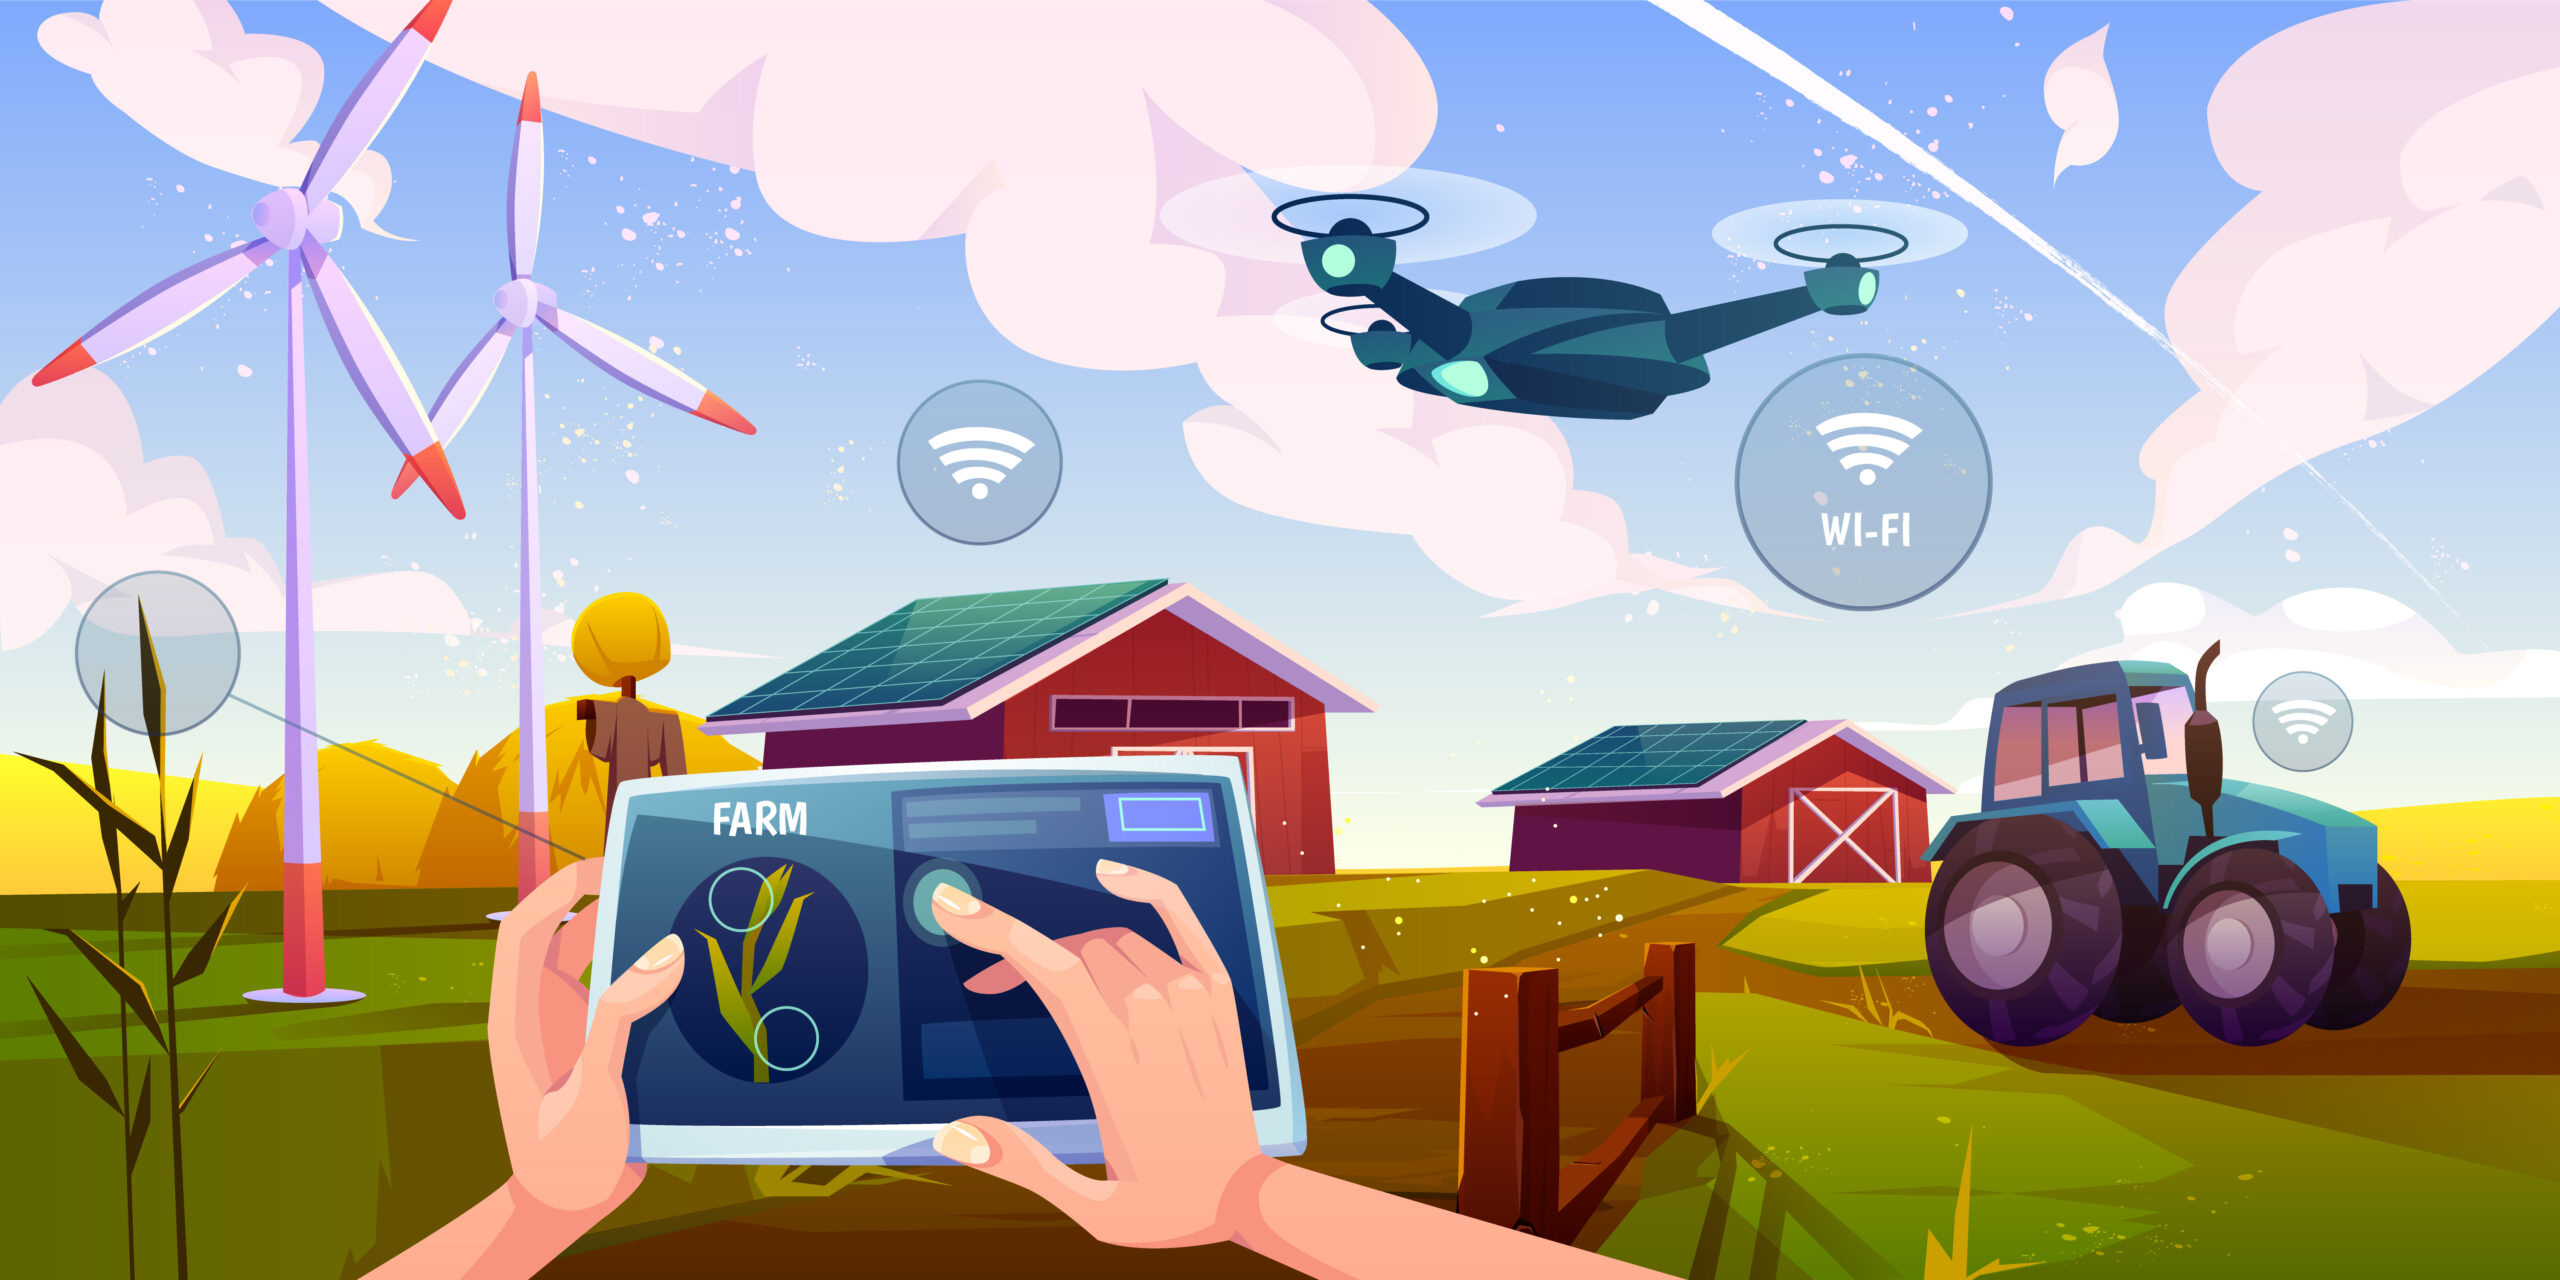 Smart farming, futuristic technologies in farm industry. Tablet with app for control plants growing, drone, wind mills, solar panels, agricultural automation and robotics Cartoon vector illustration